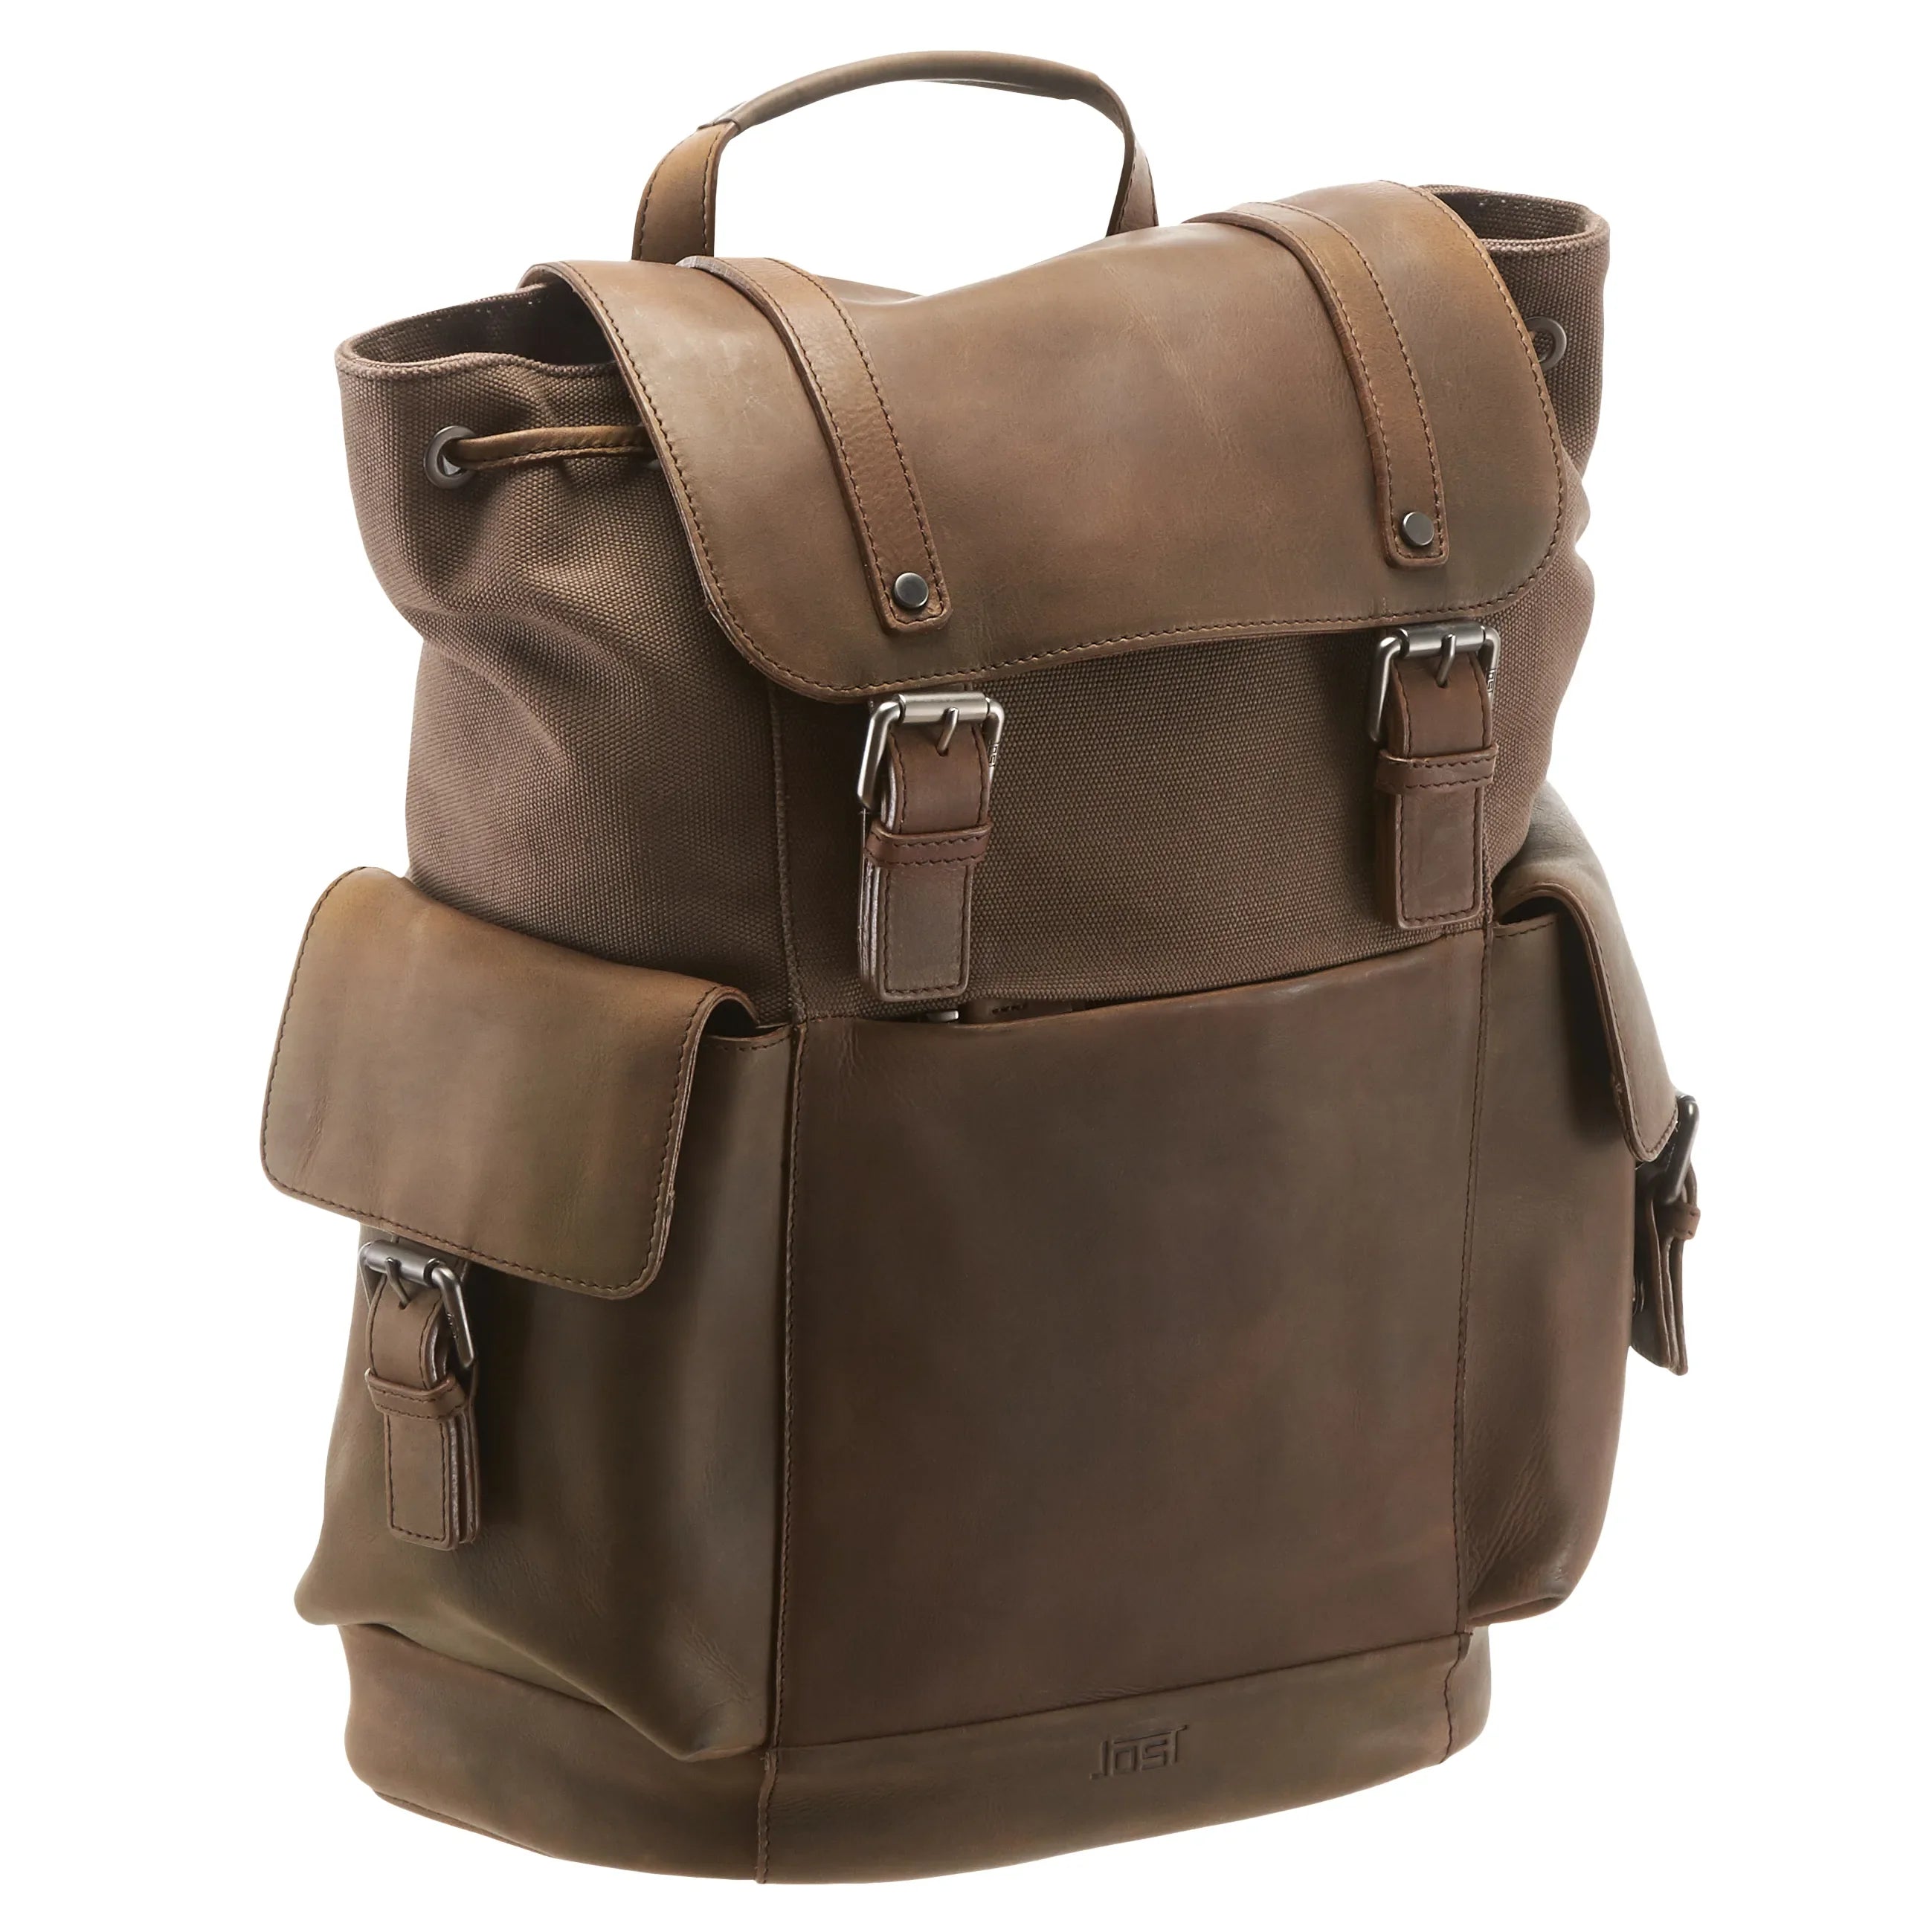 Jost Salo bag backpack with laptop compartment 45 cm - brown